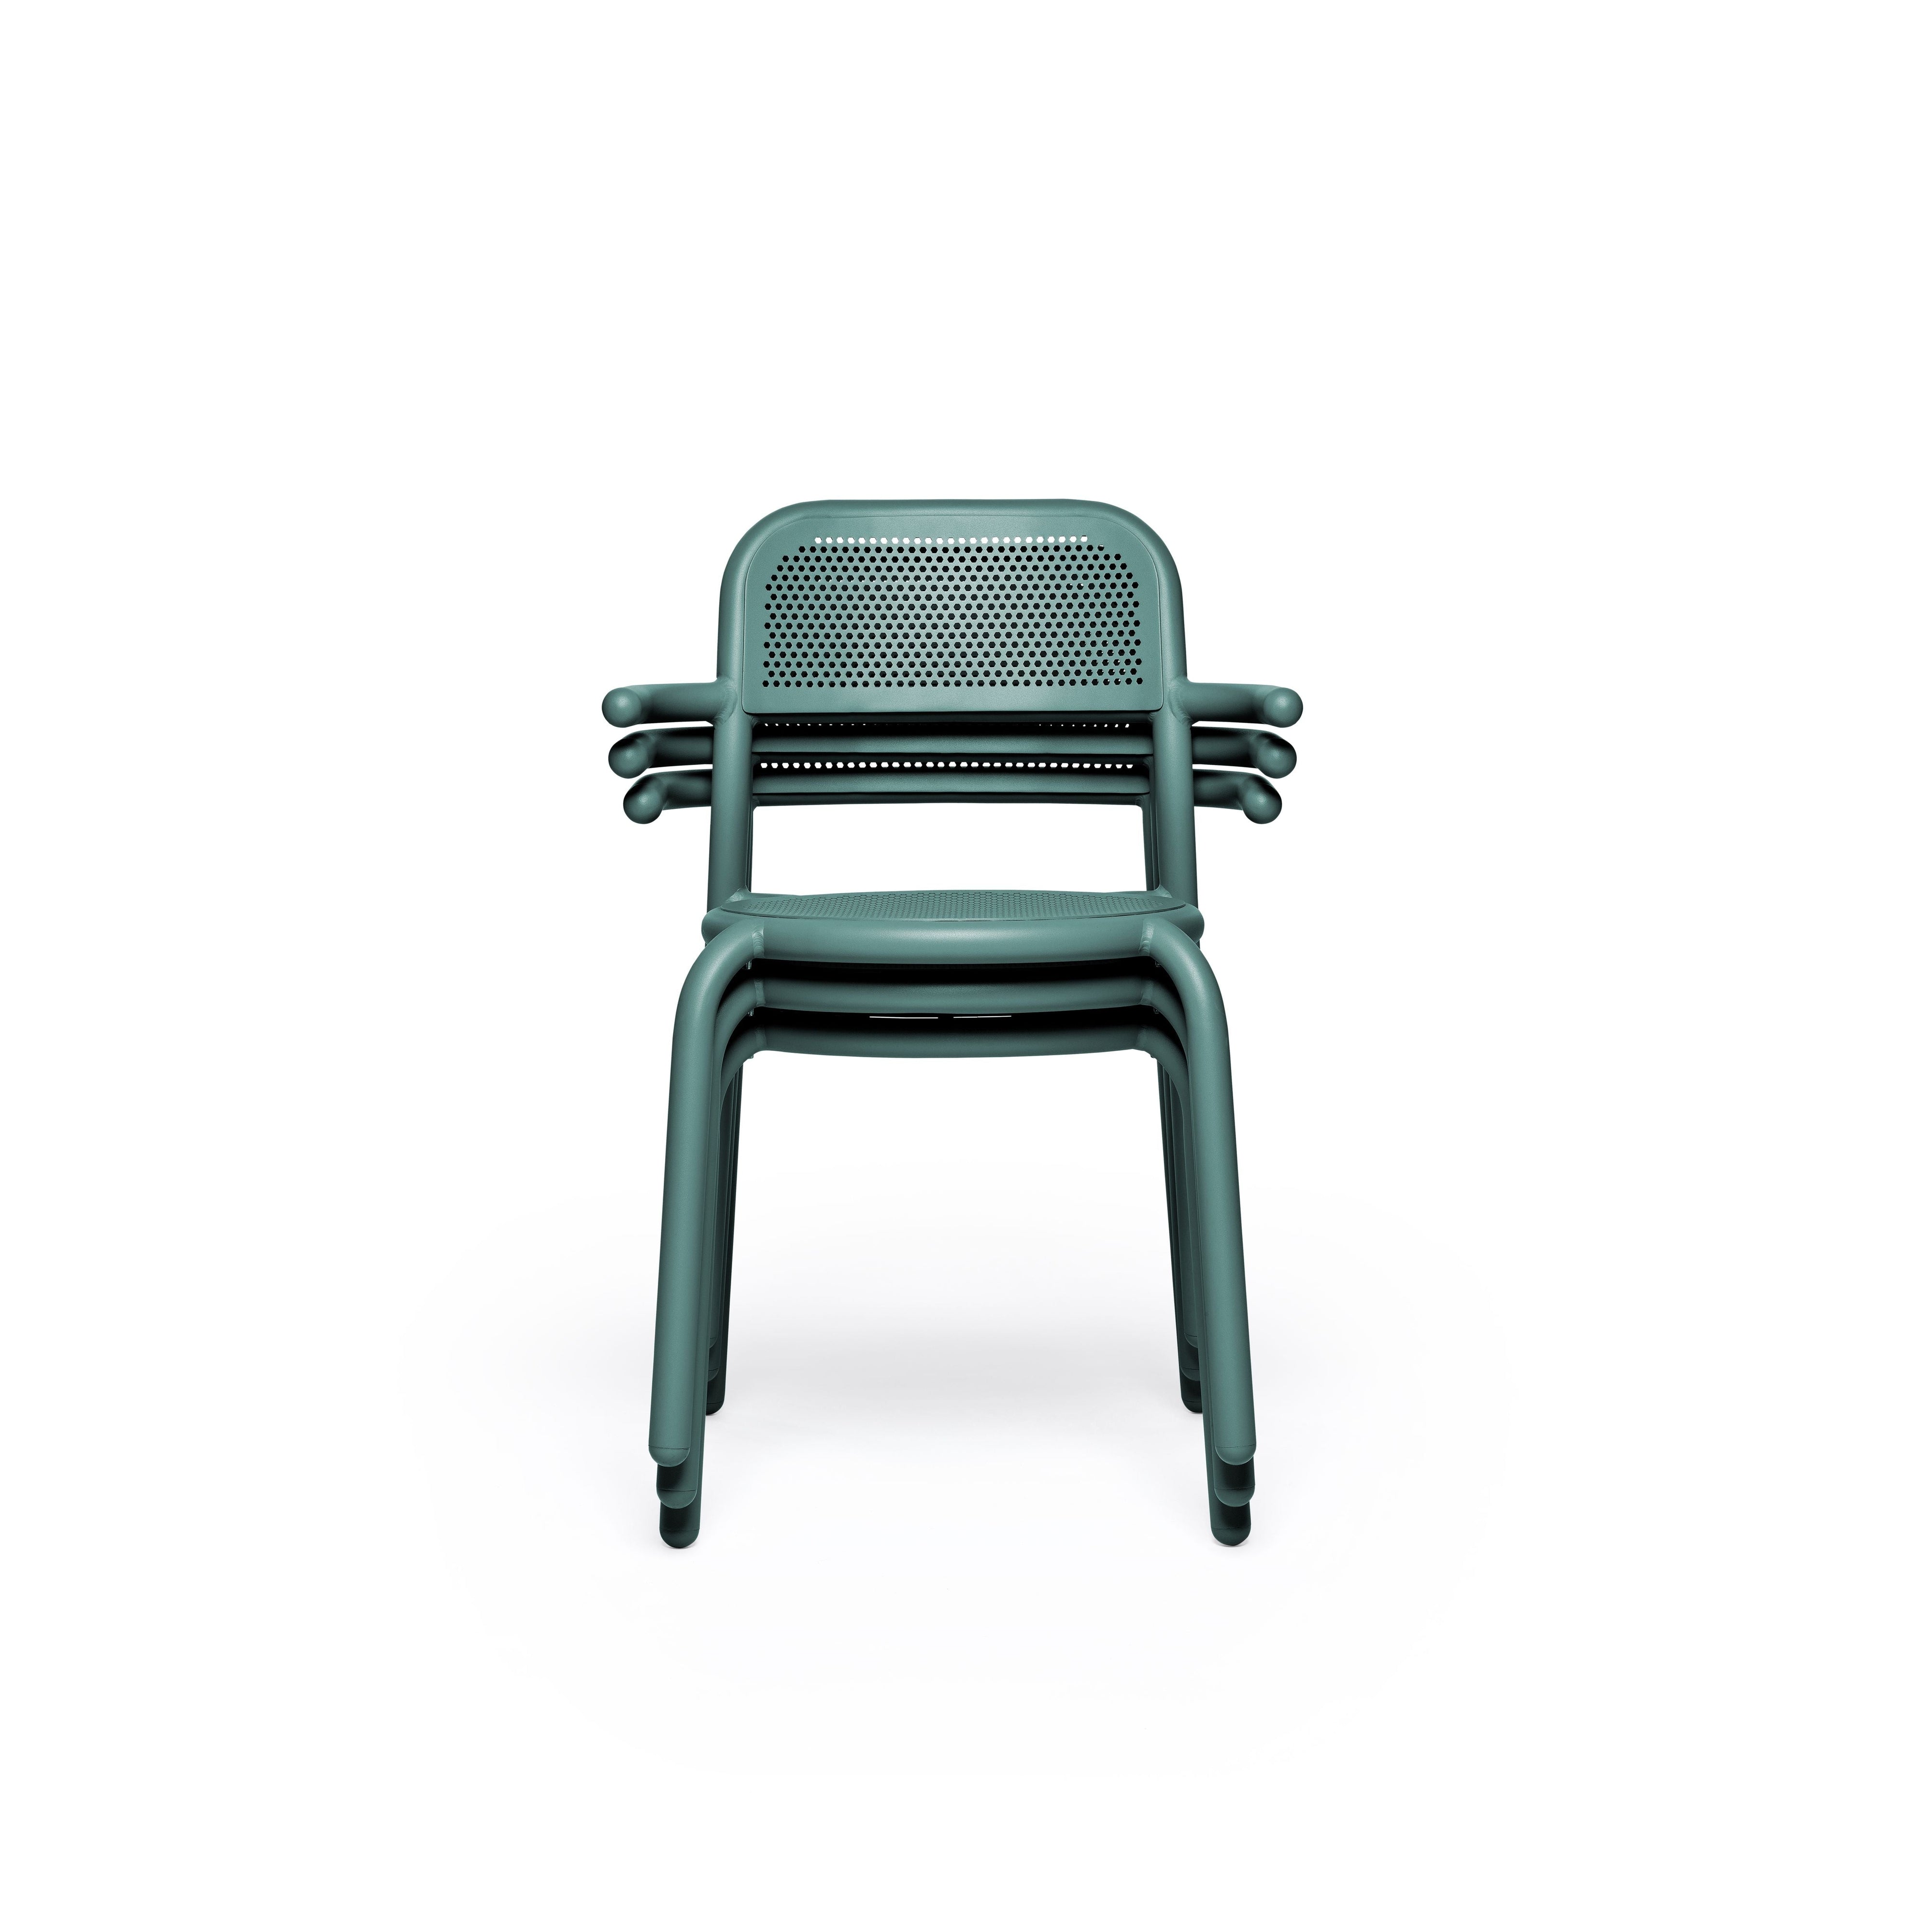 Fatboy Toni fauteuil Pine Green, 4 pc's.